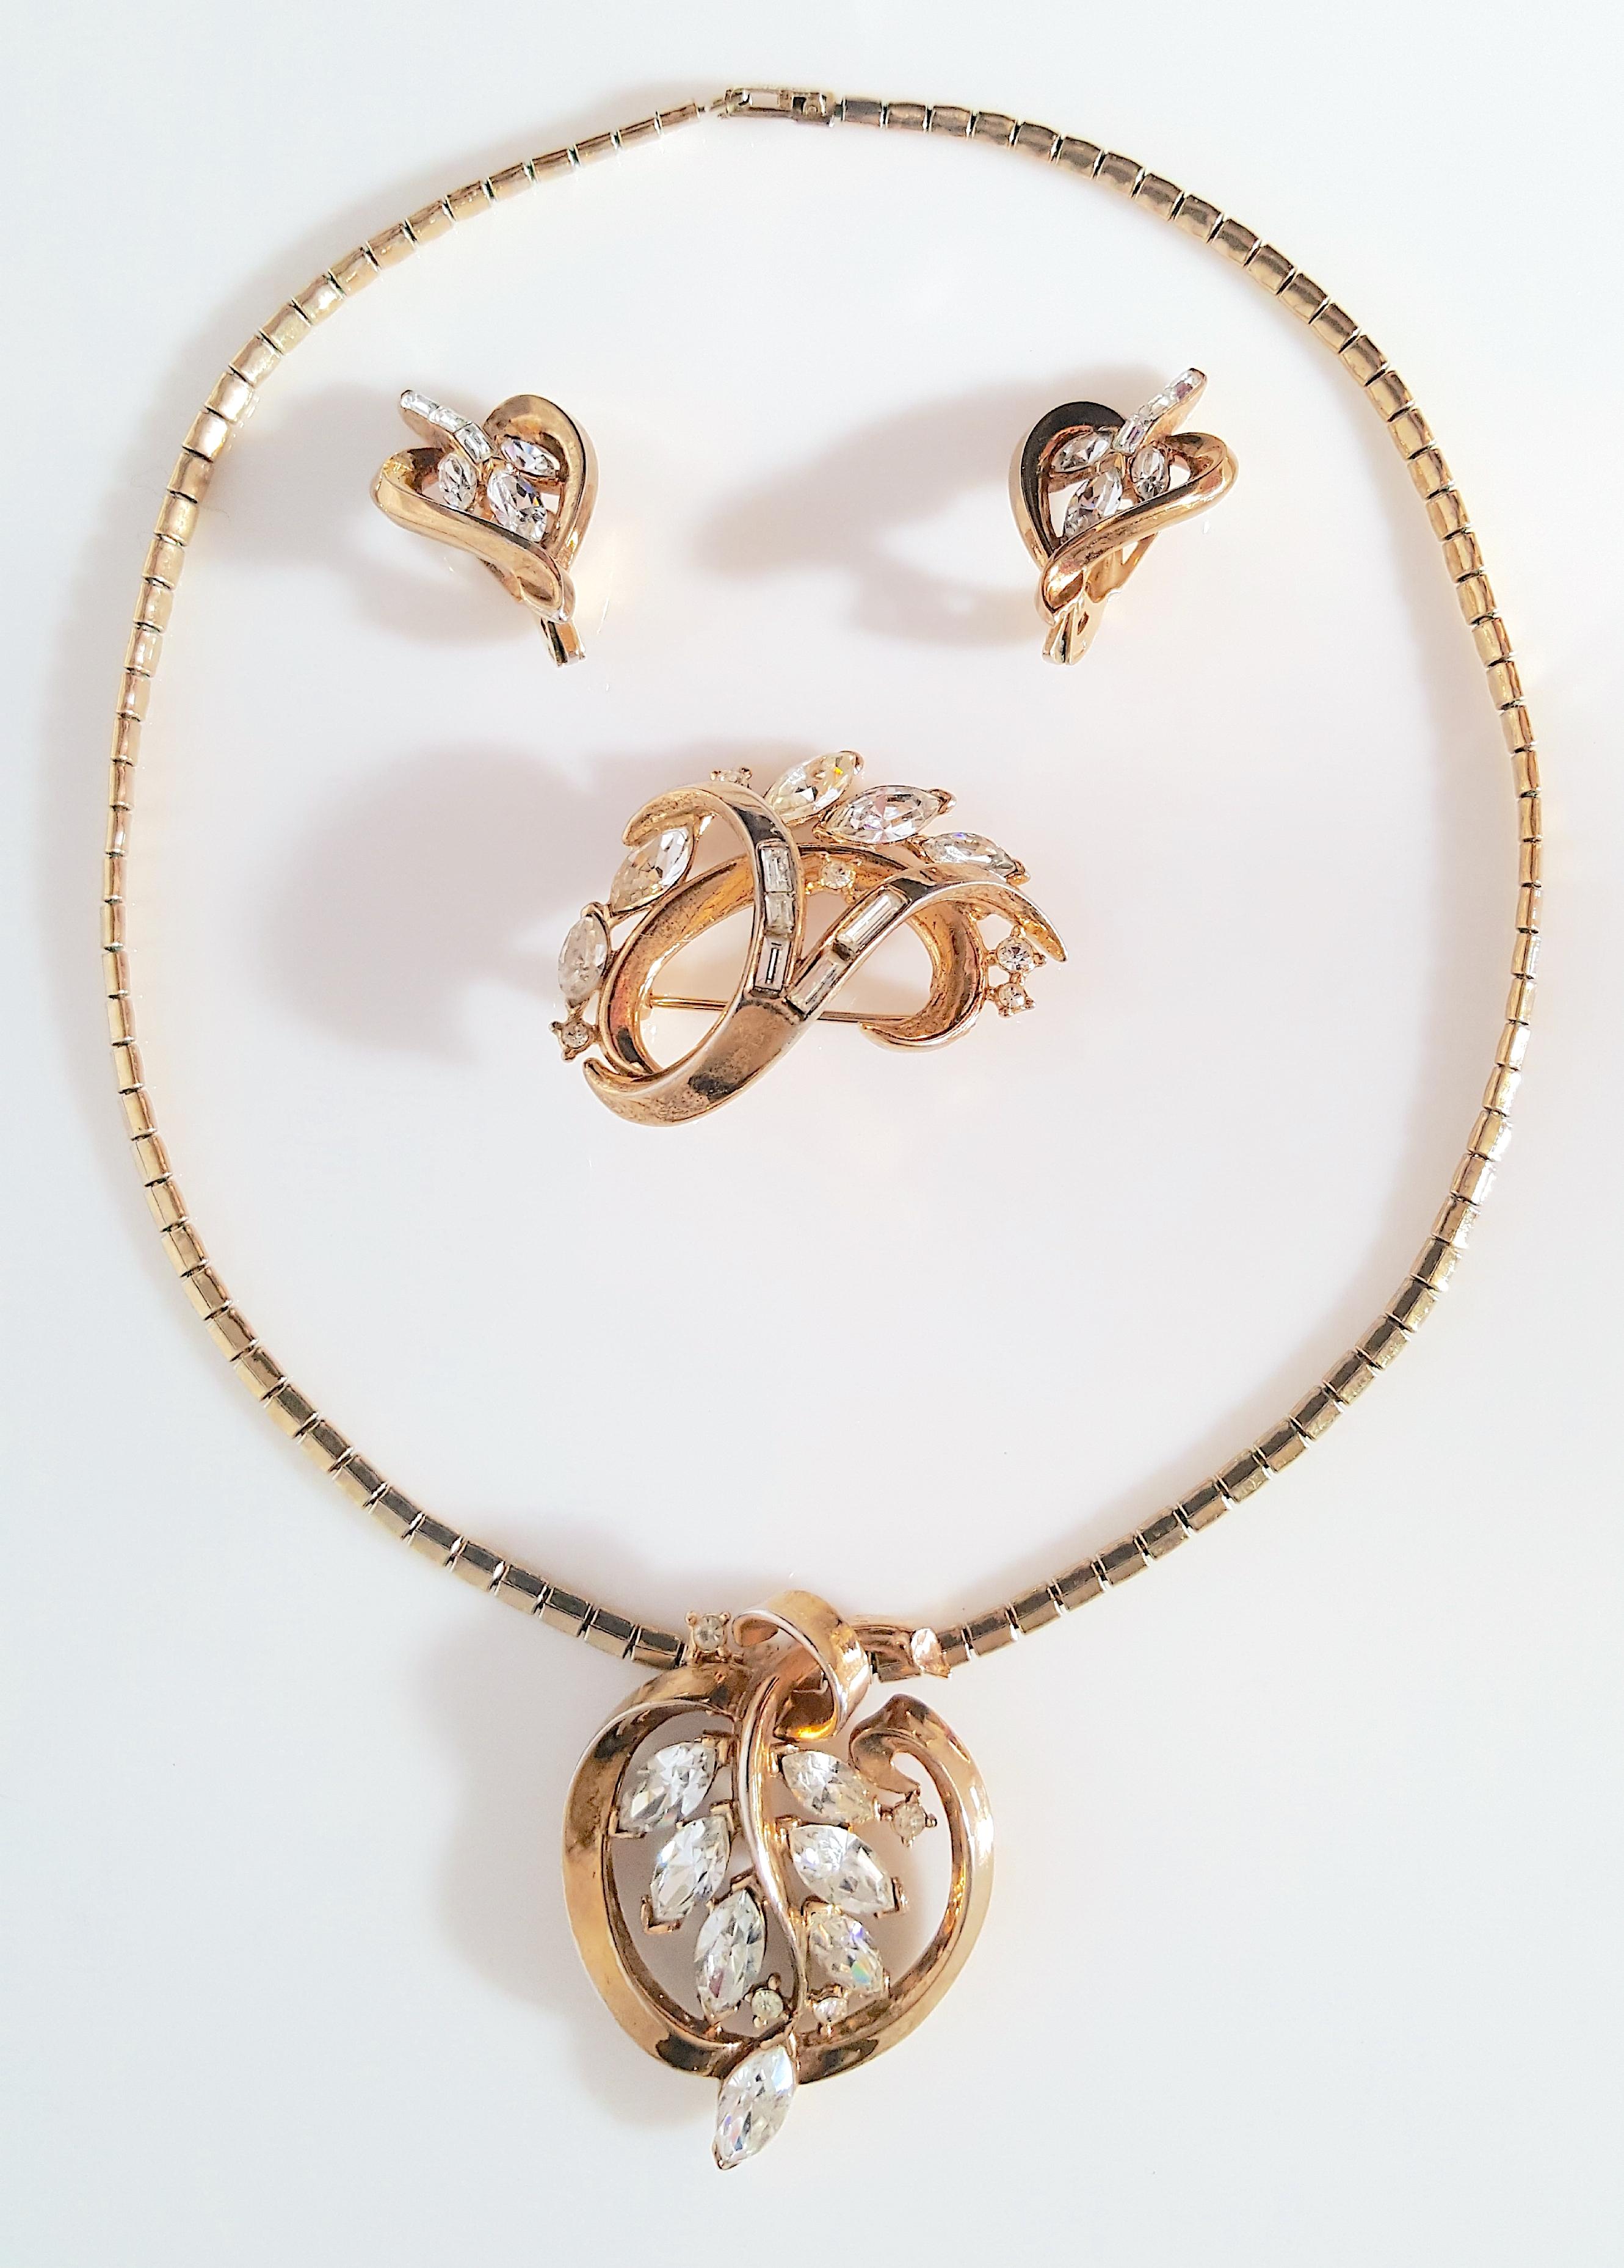 CrownTrifari 1940s Philippe RareParure InvisiblySetCrystal EarringBroochNecklace For Sale 6